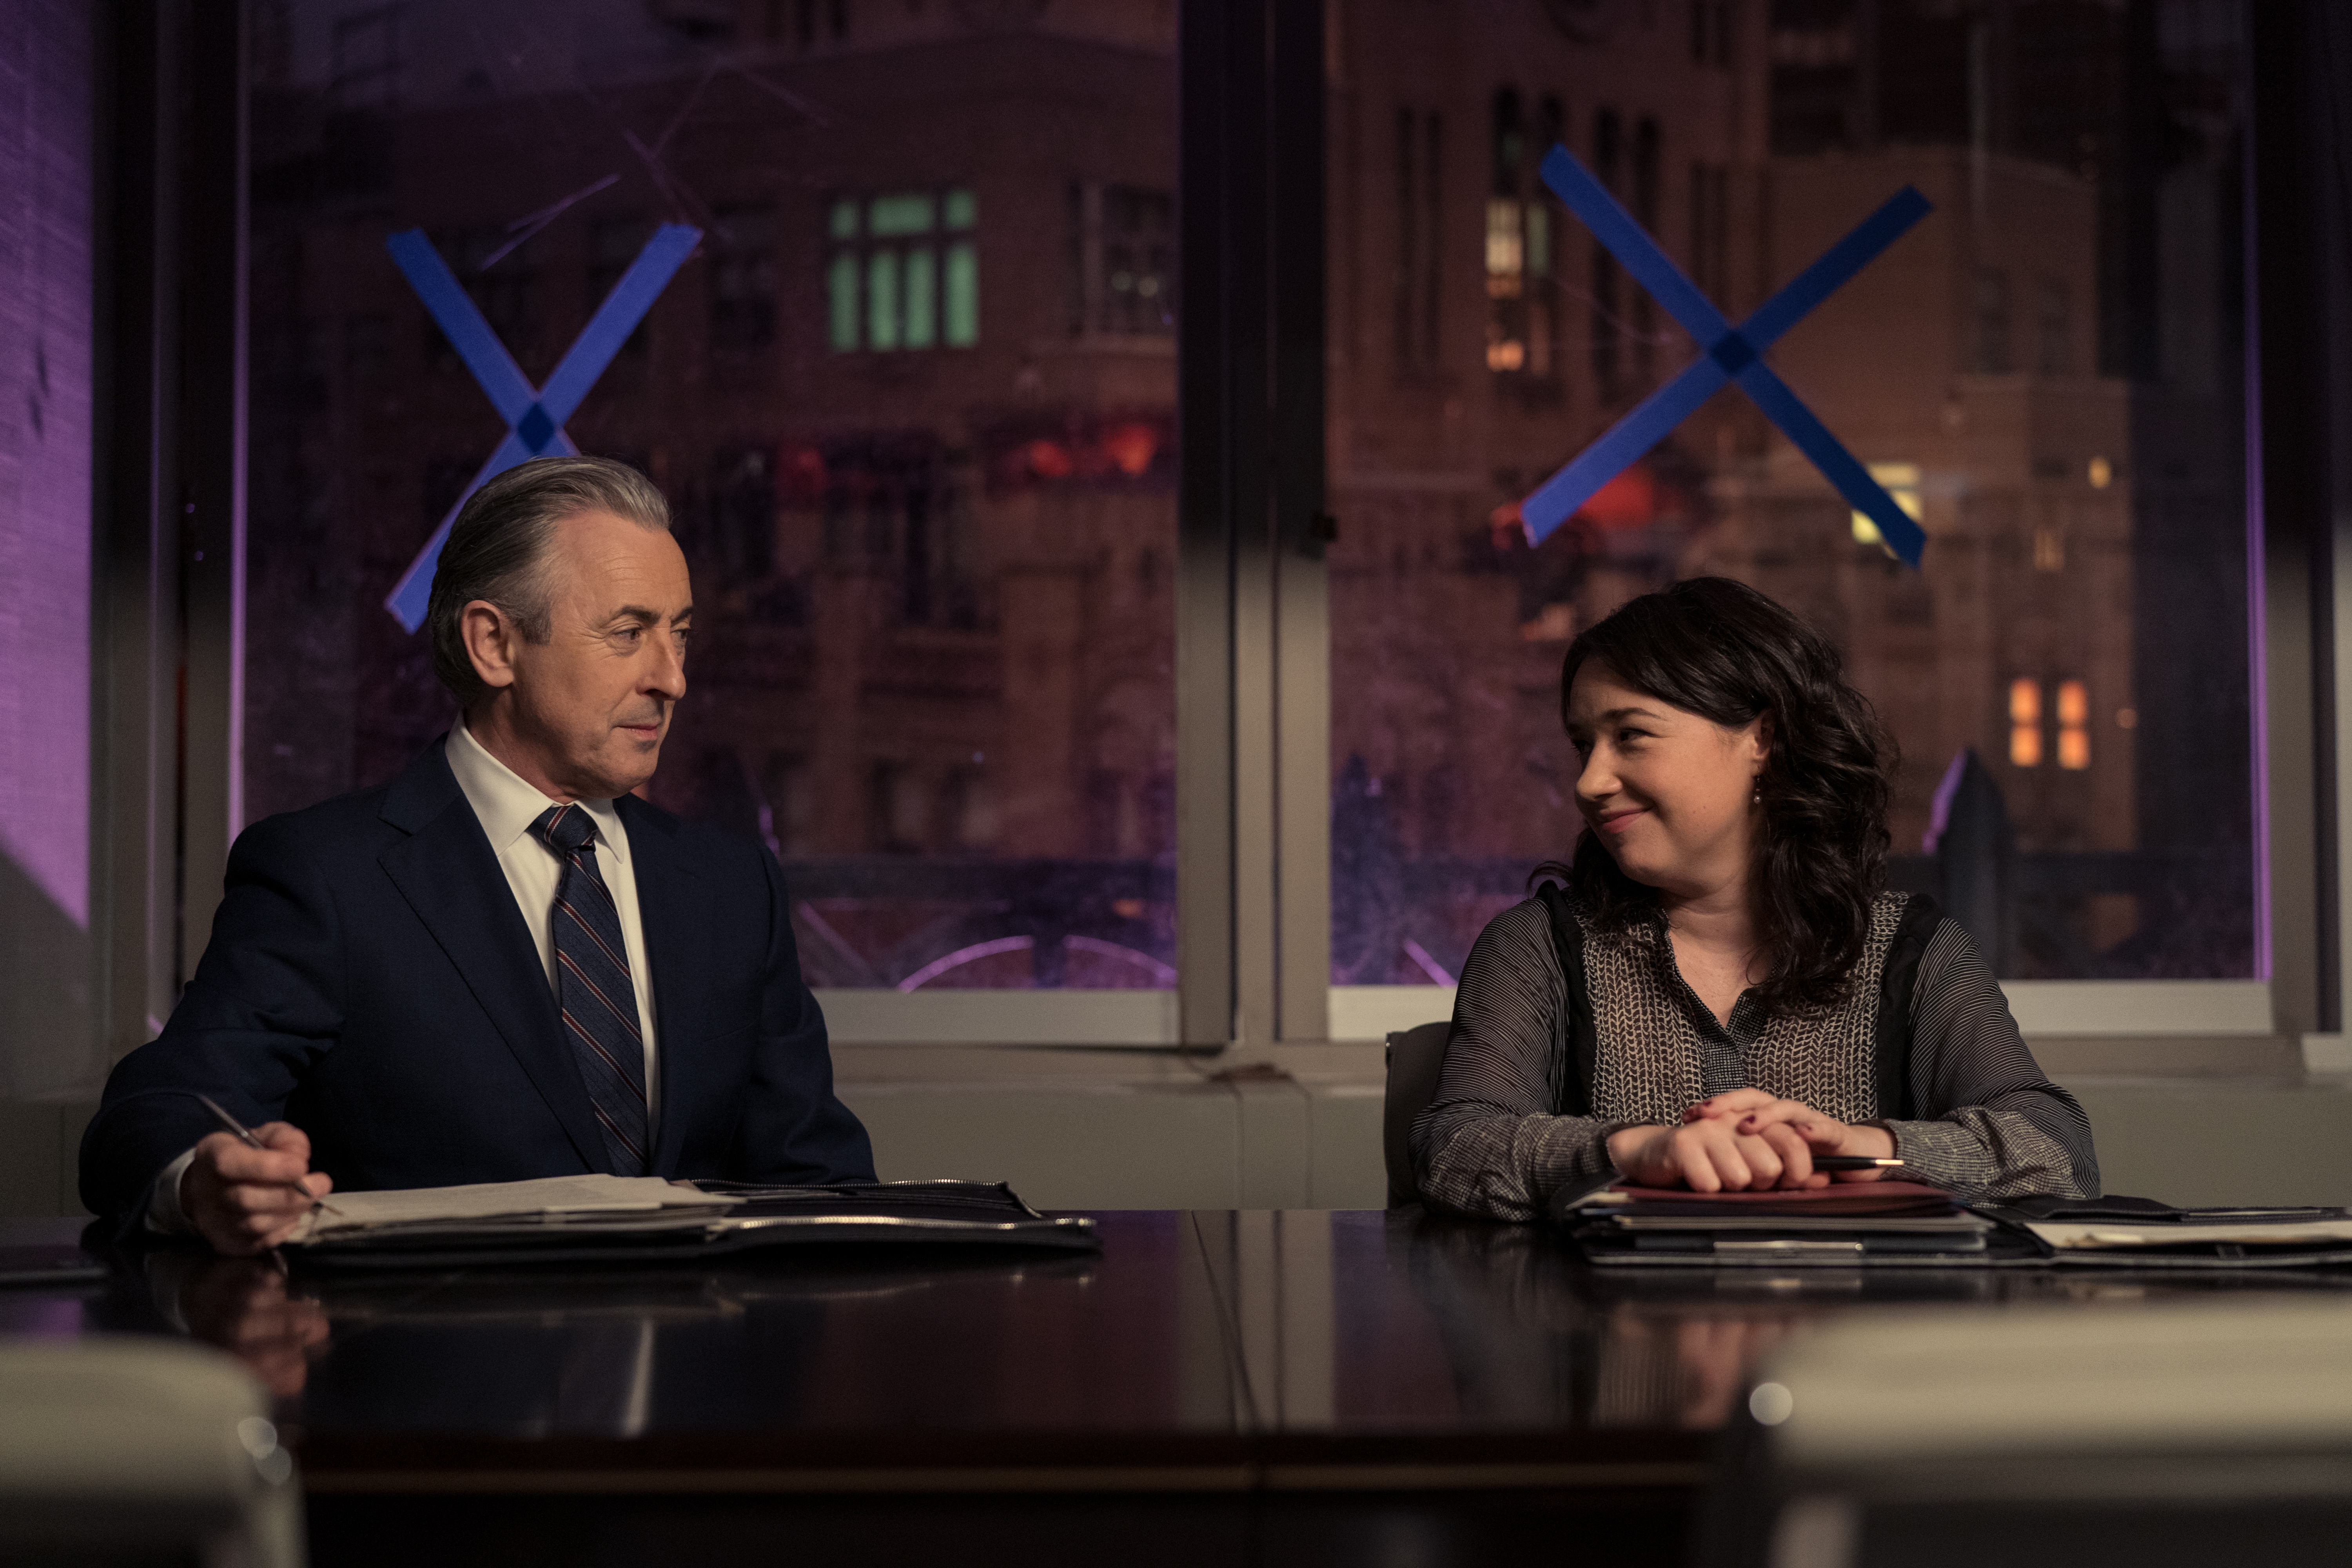 The Good Fight 6x02 "The End of the Yips" Alan Cumming as Eli Gold and Sarah Steele as Marissa Gold